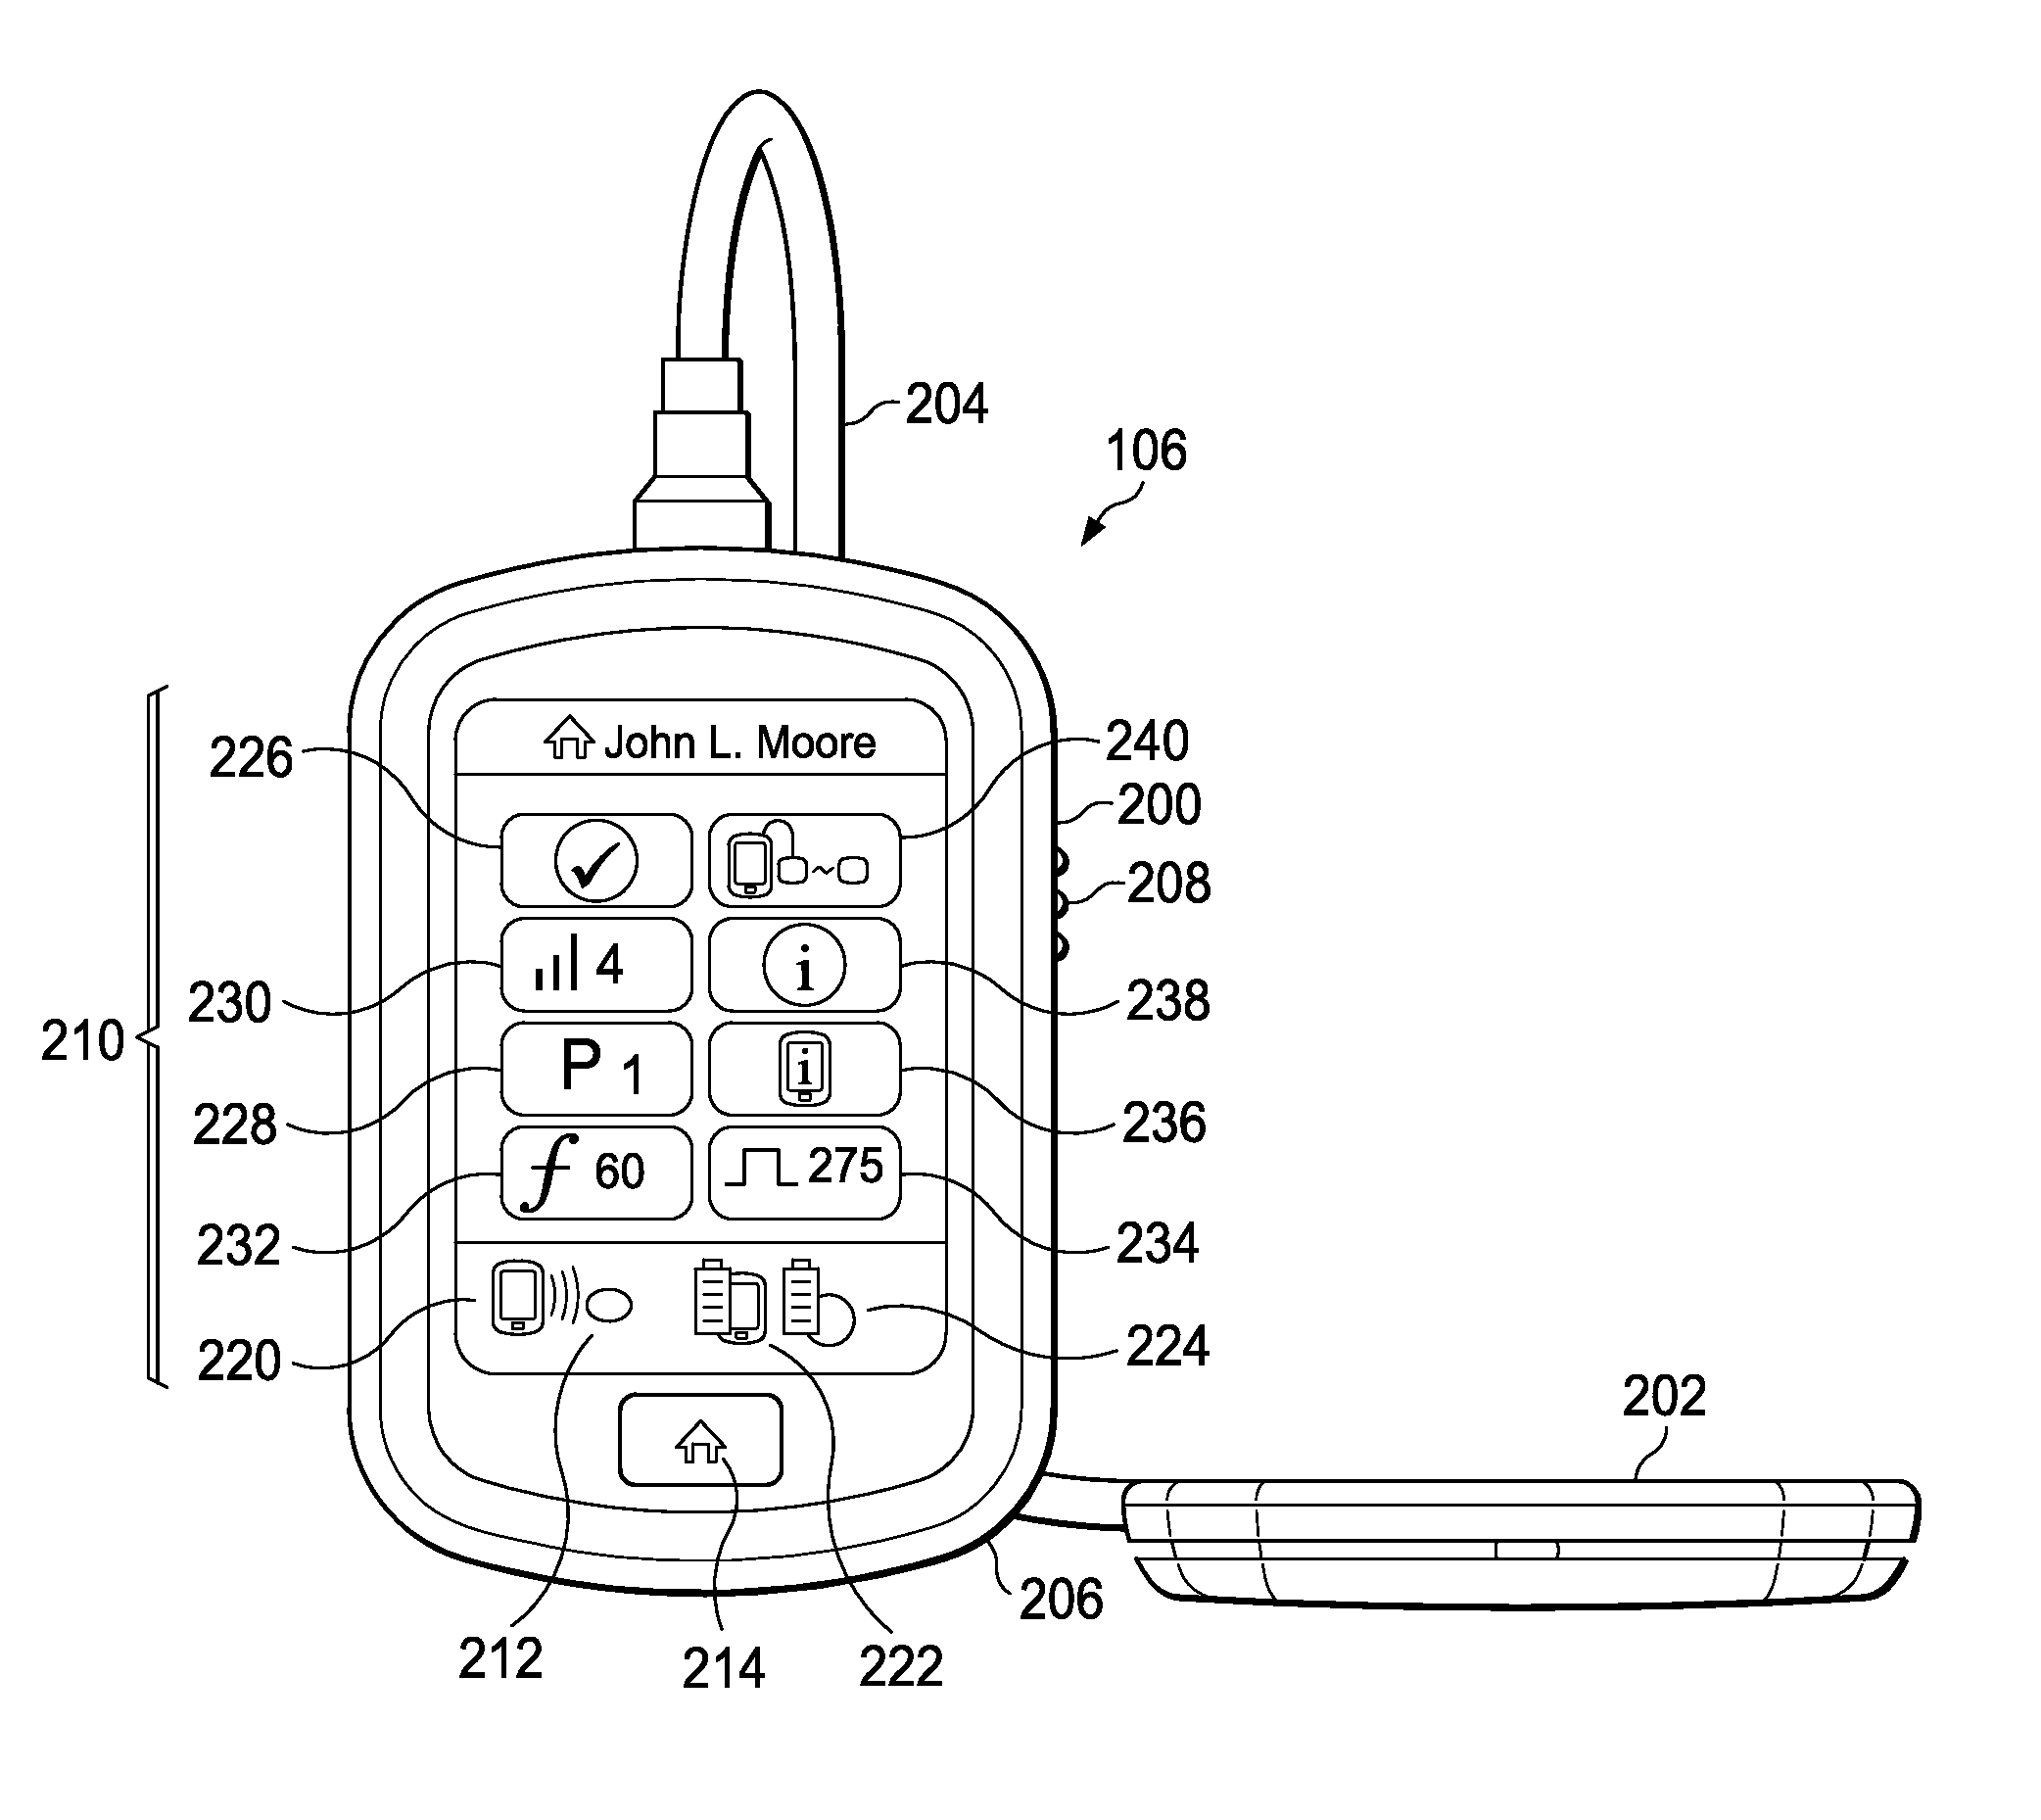 Systems, methods, and devices for generating arbitrary stimulation waveforms